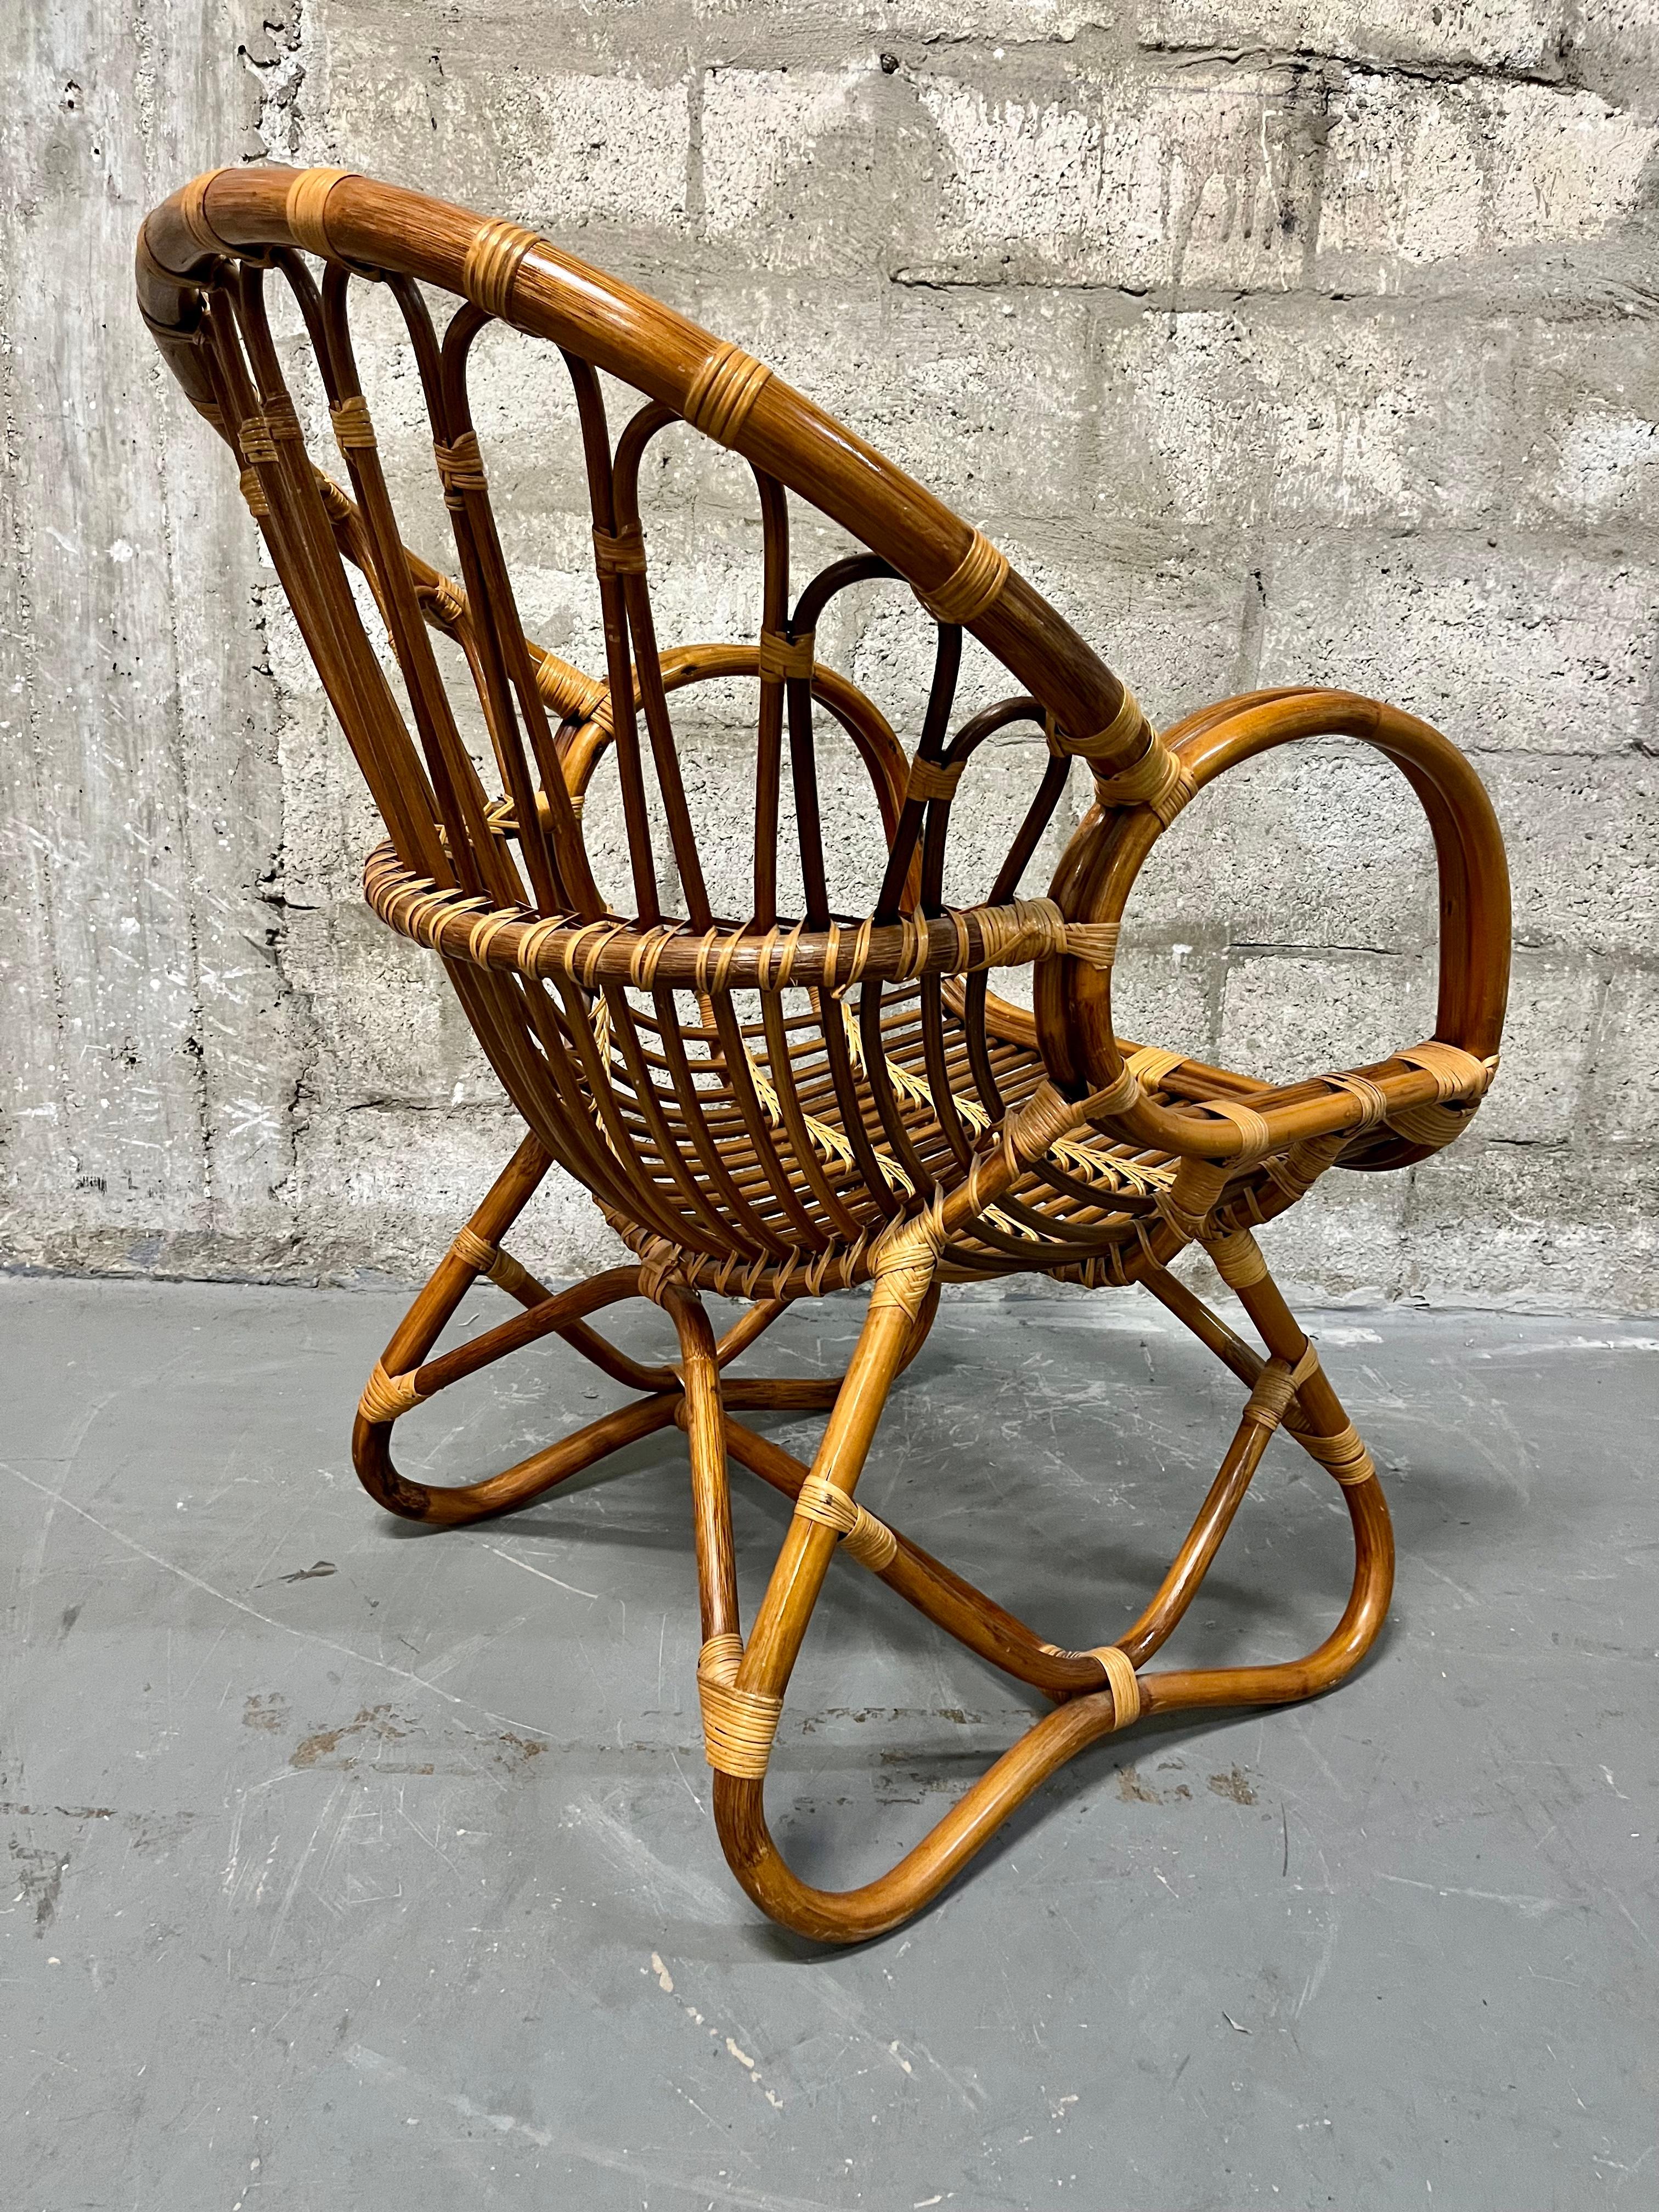 Mid-20th Century Mid Century Modern Rattan Lounge Chair in the Franco Albini's Style. Circa 1970s